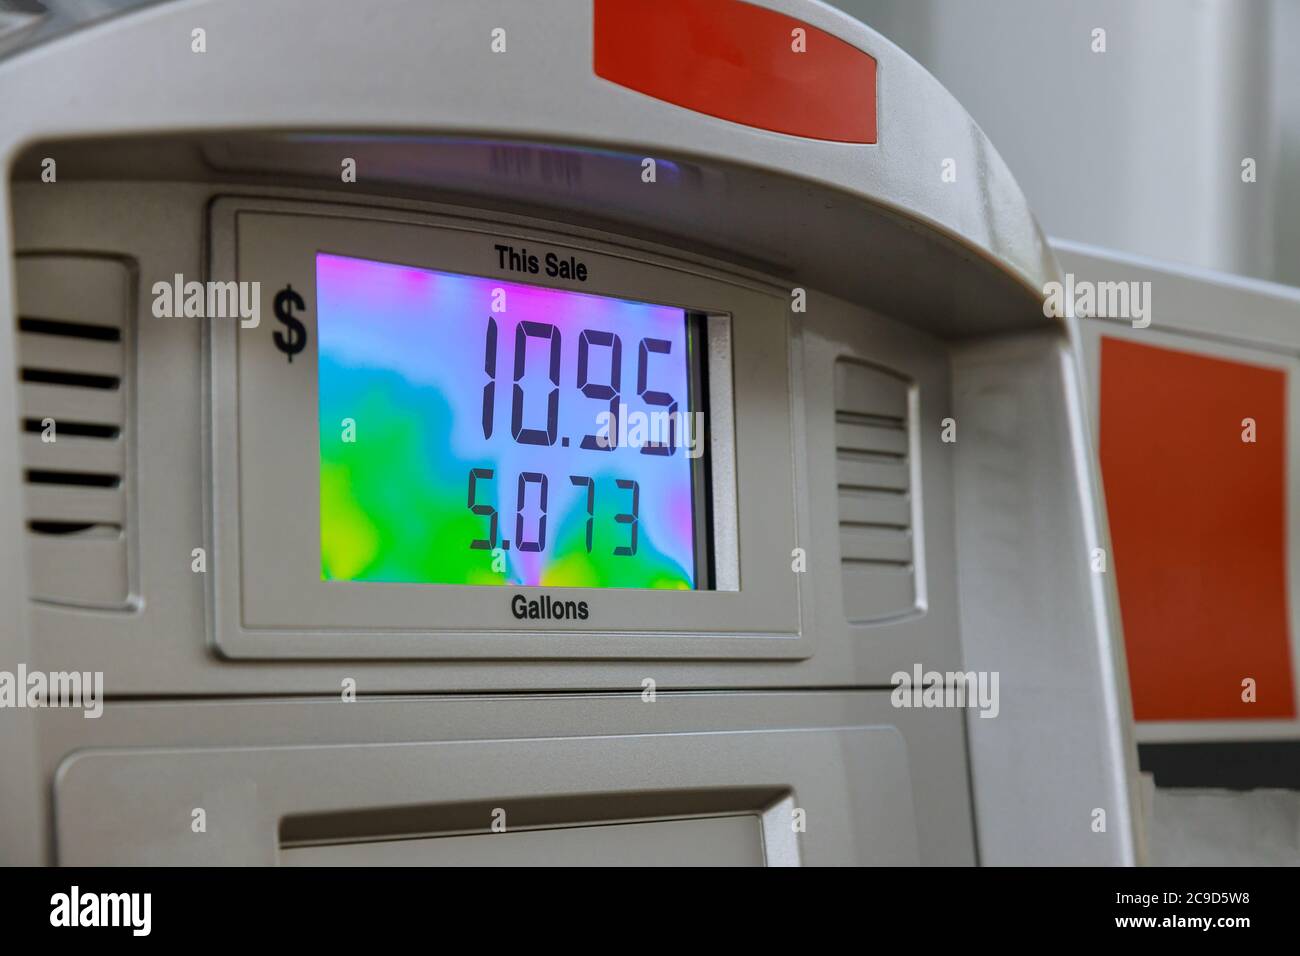 Gas with price closeup modern fuel station showing counter with fuel price. Stock Photo